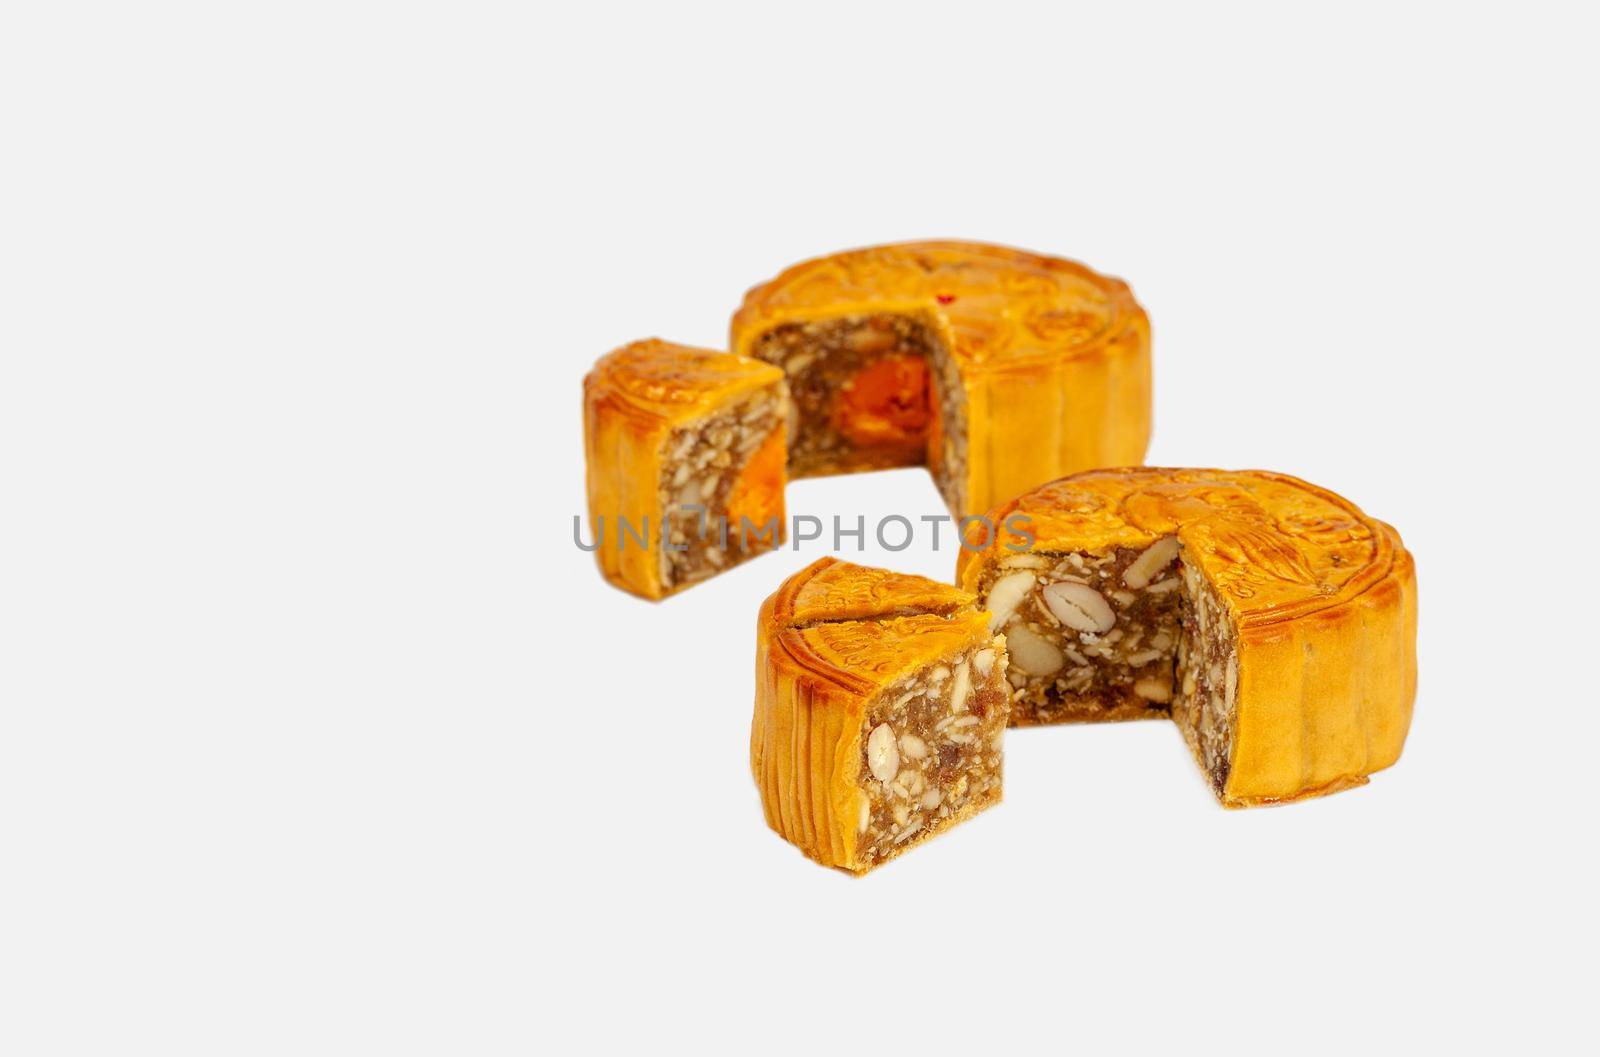 Wuren (Mixed Nuts) and  Salted Egg Yolk filling Mooncake on white background by toa55